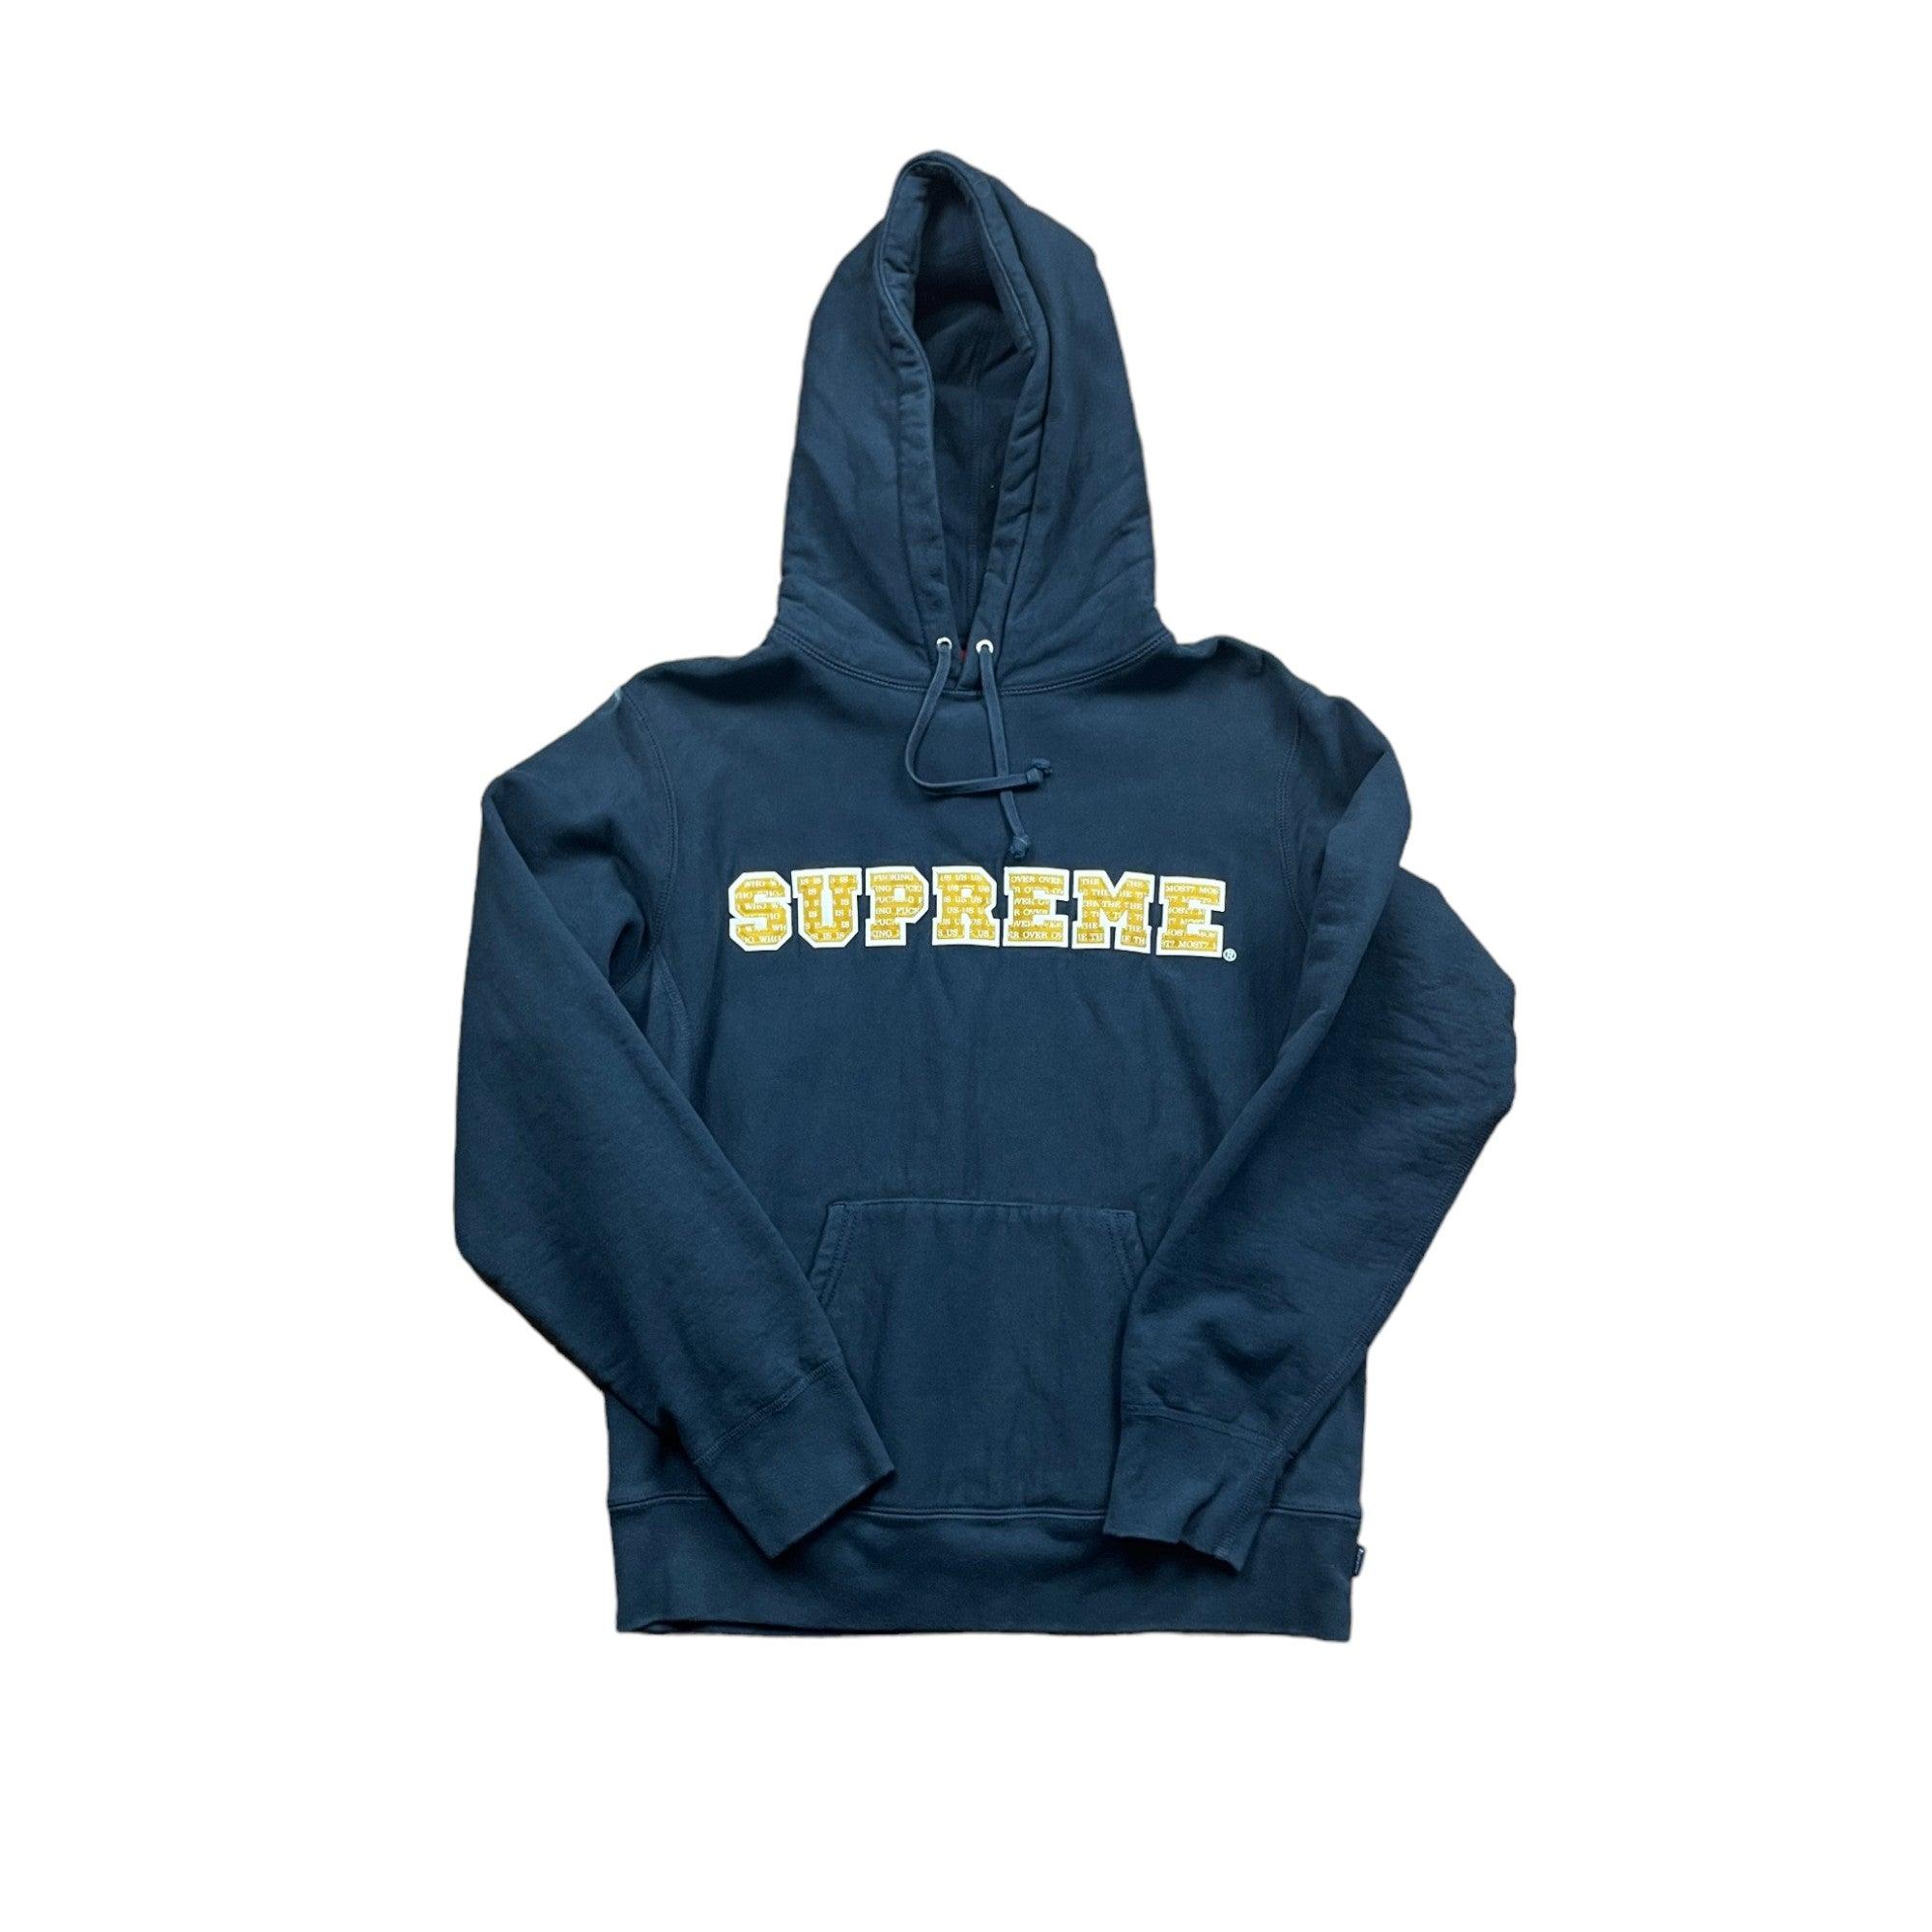 Black Supreme The Most Hated Hoodie - Small - The Streetwear Studio